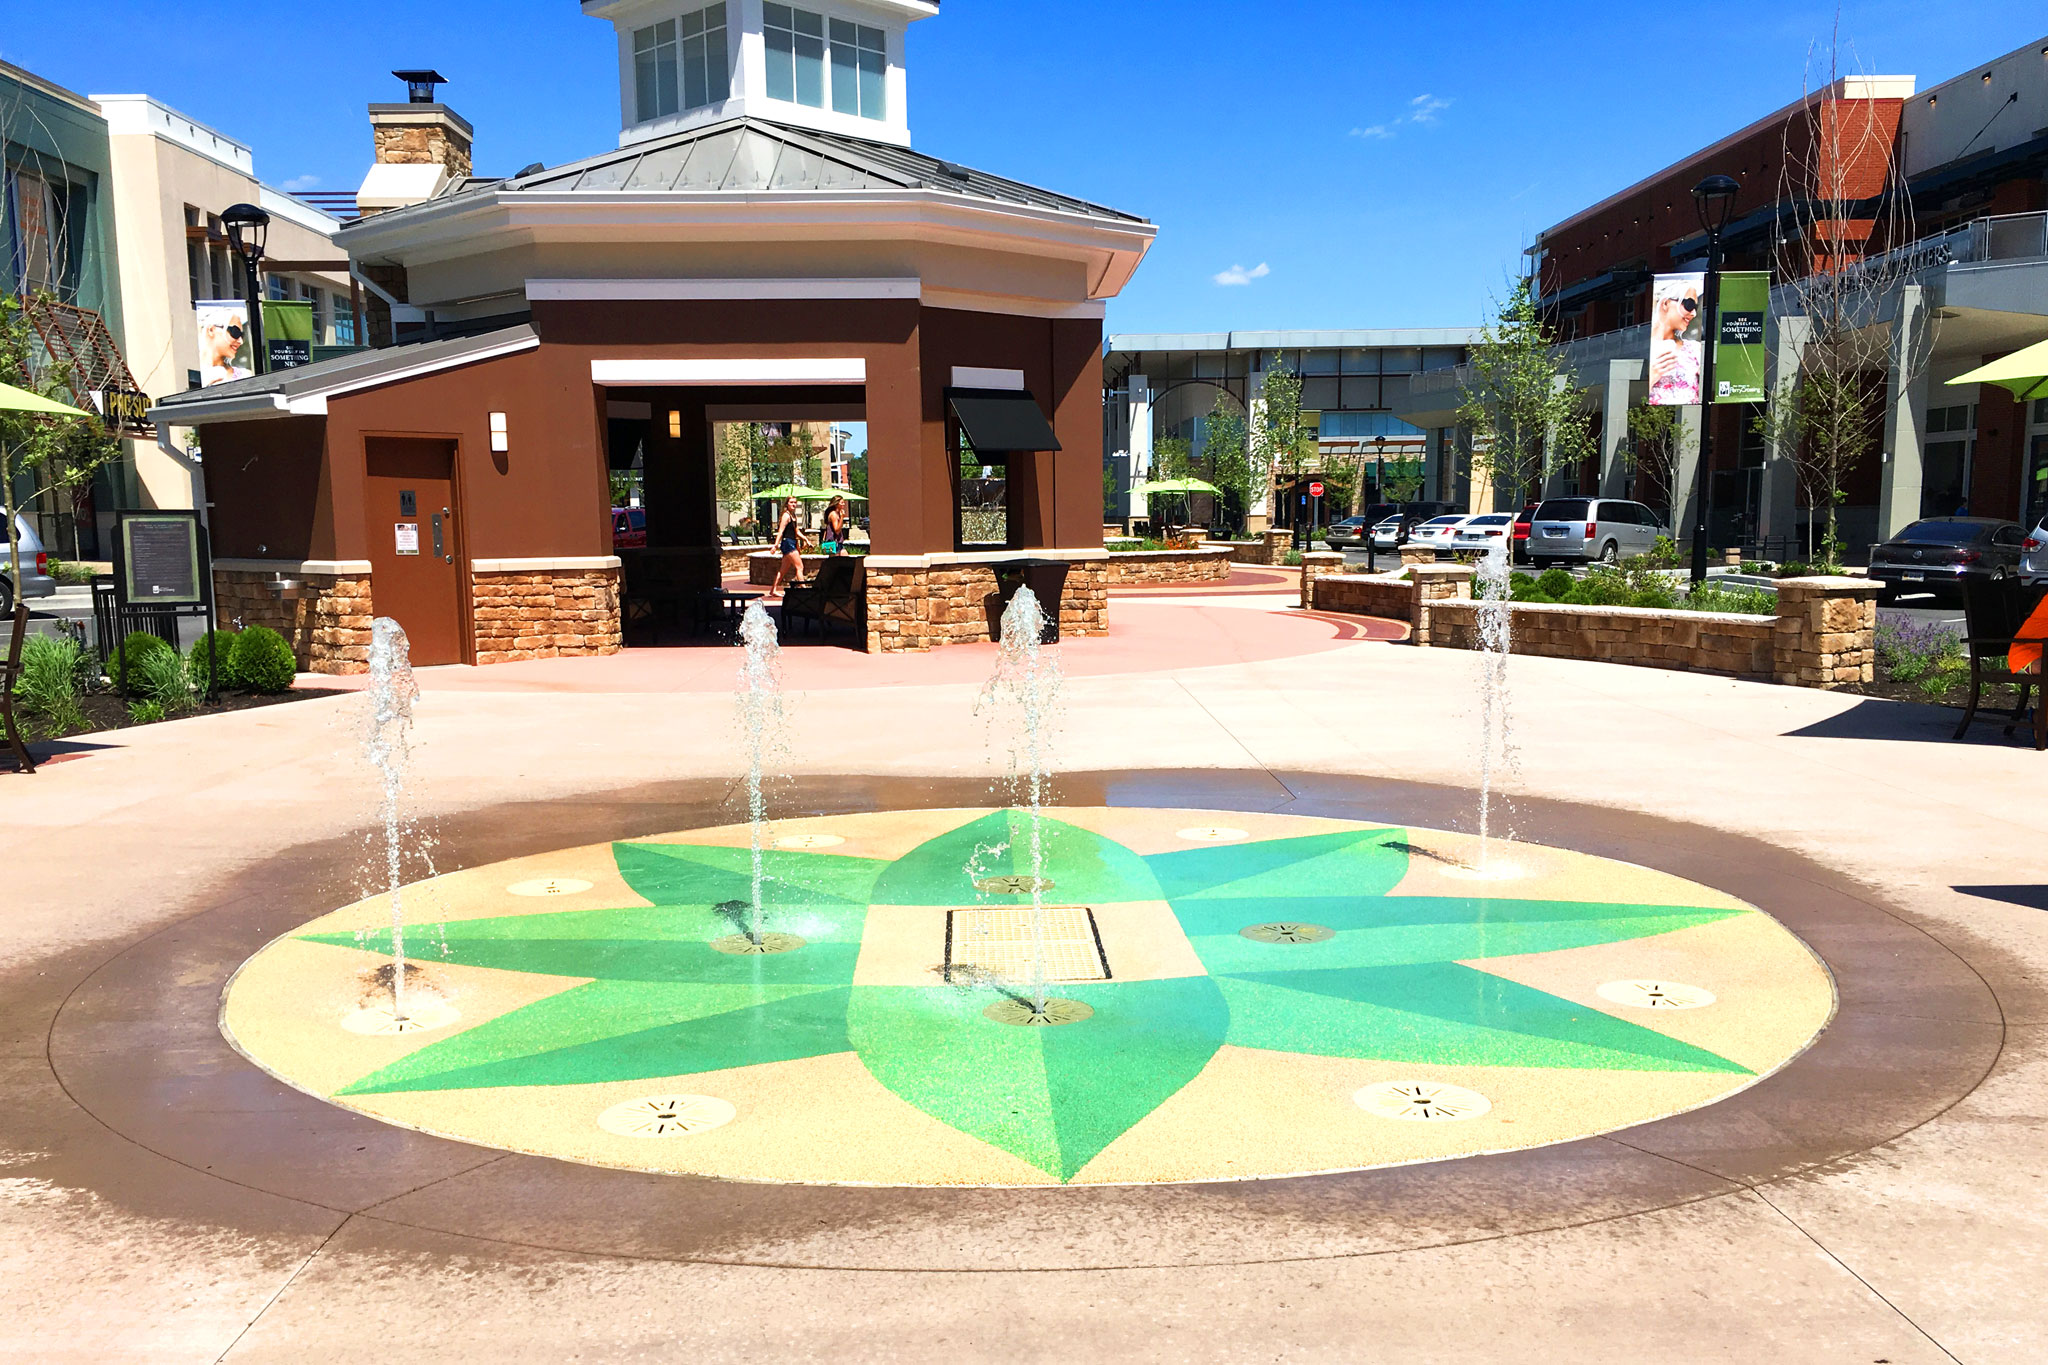 Interactive Water Feature At Retail Outlet Delta Fountains